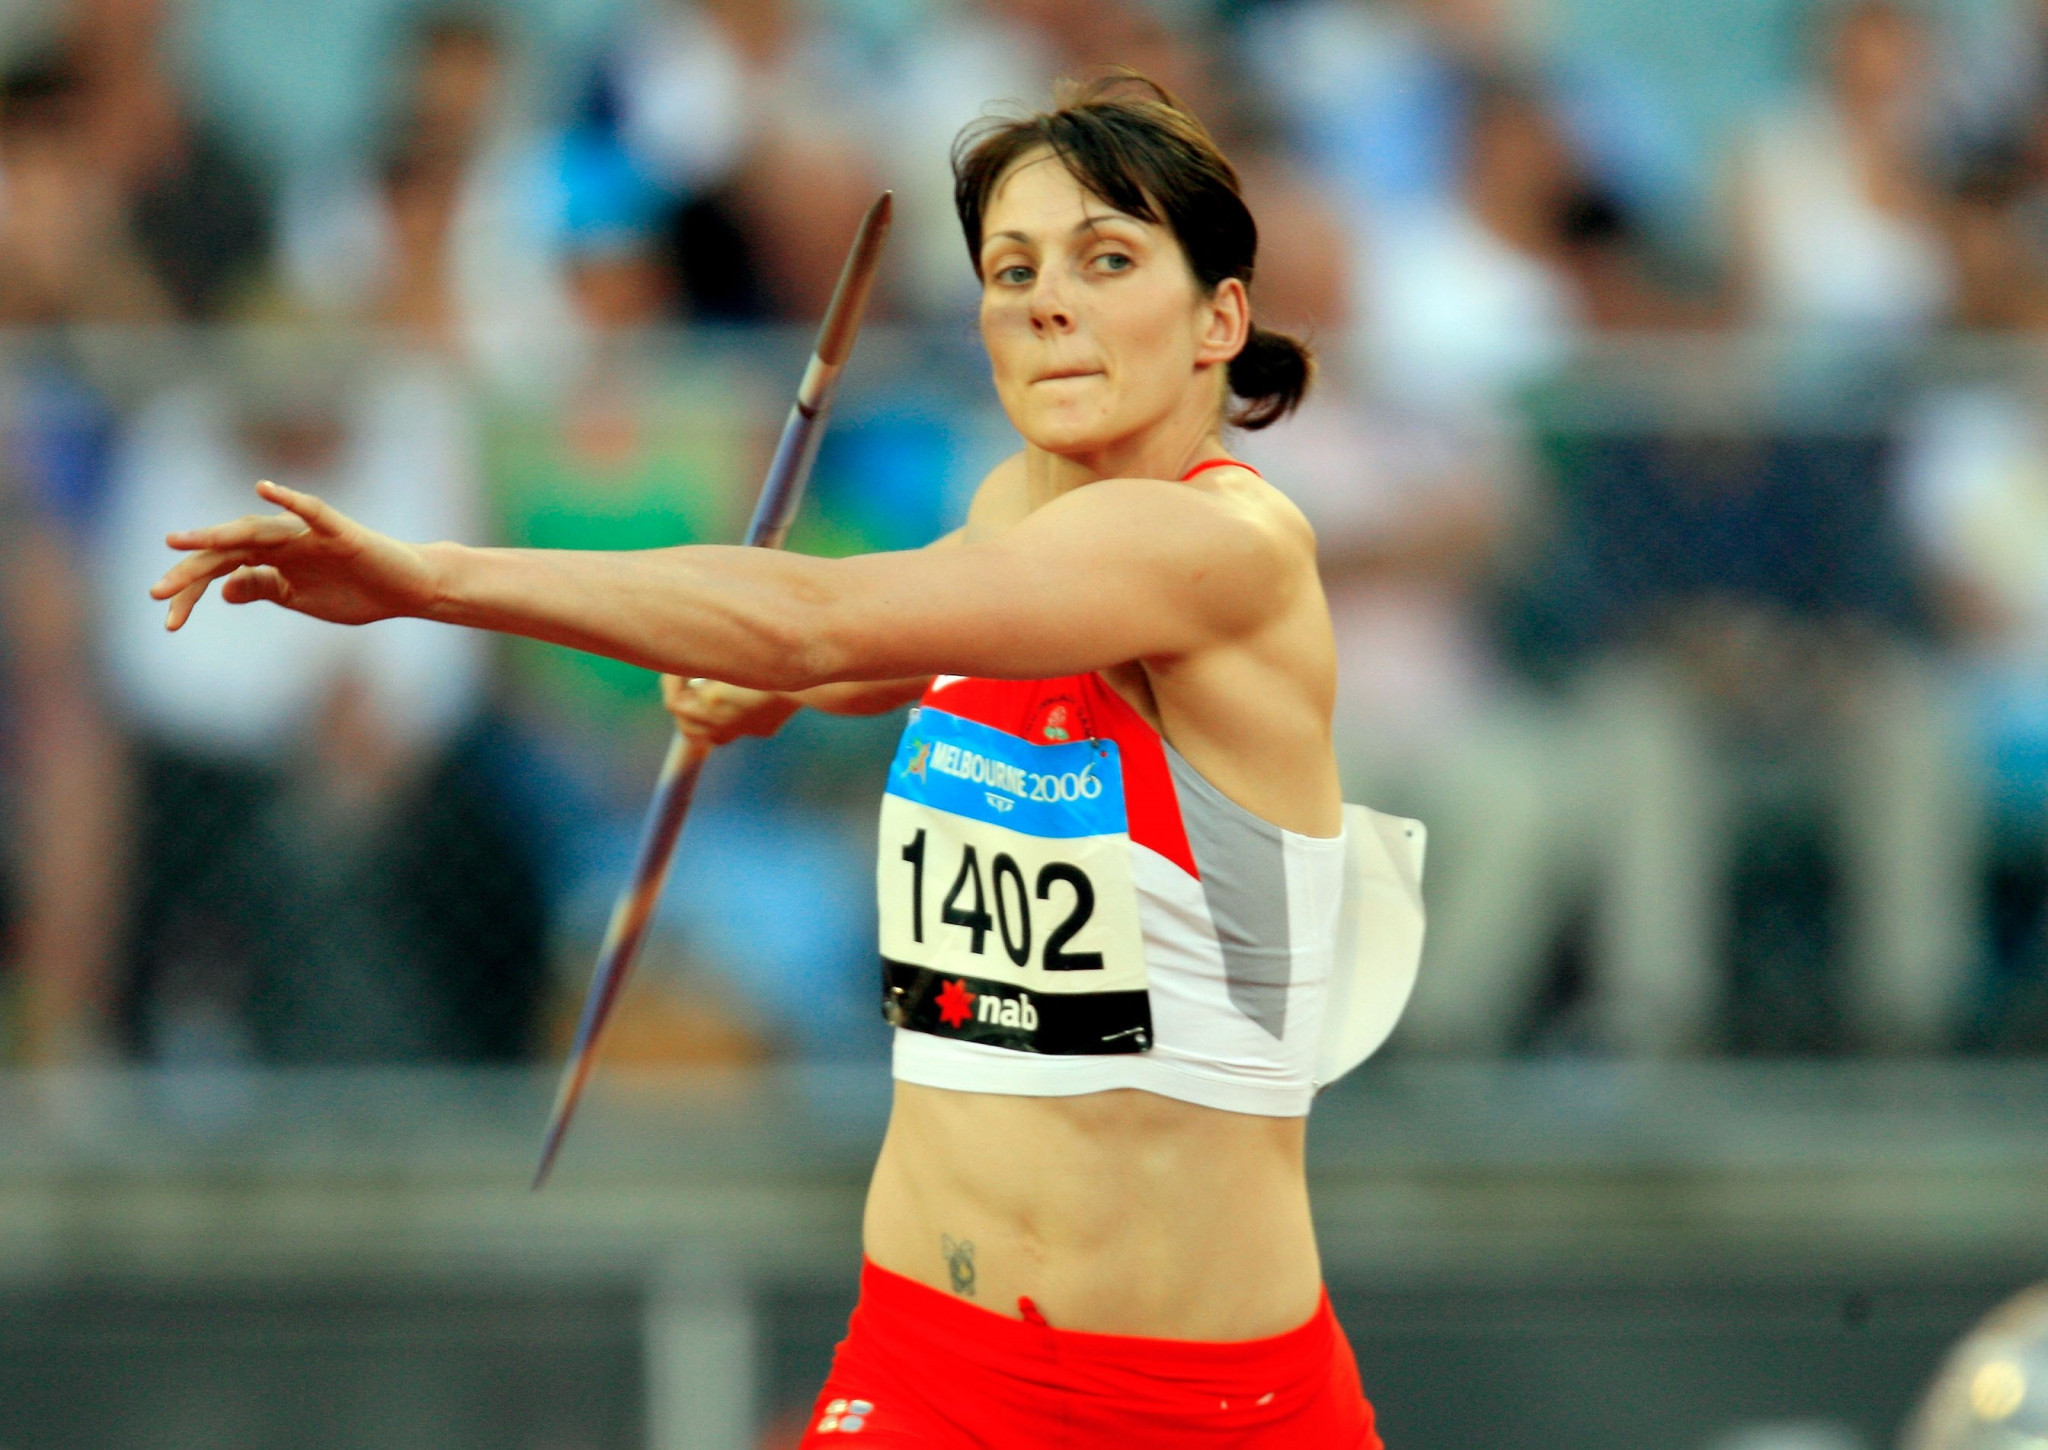 Kelly Sotherton won heptathlon gold at the Melbourne 2006 Commonwealth Games ©Getty Images